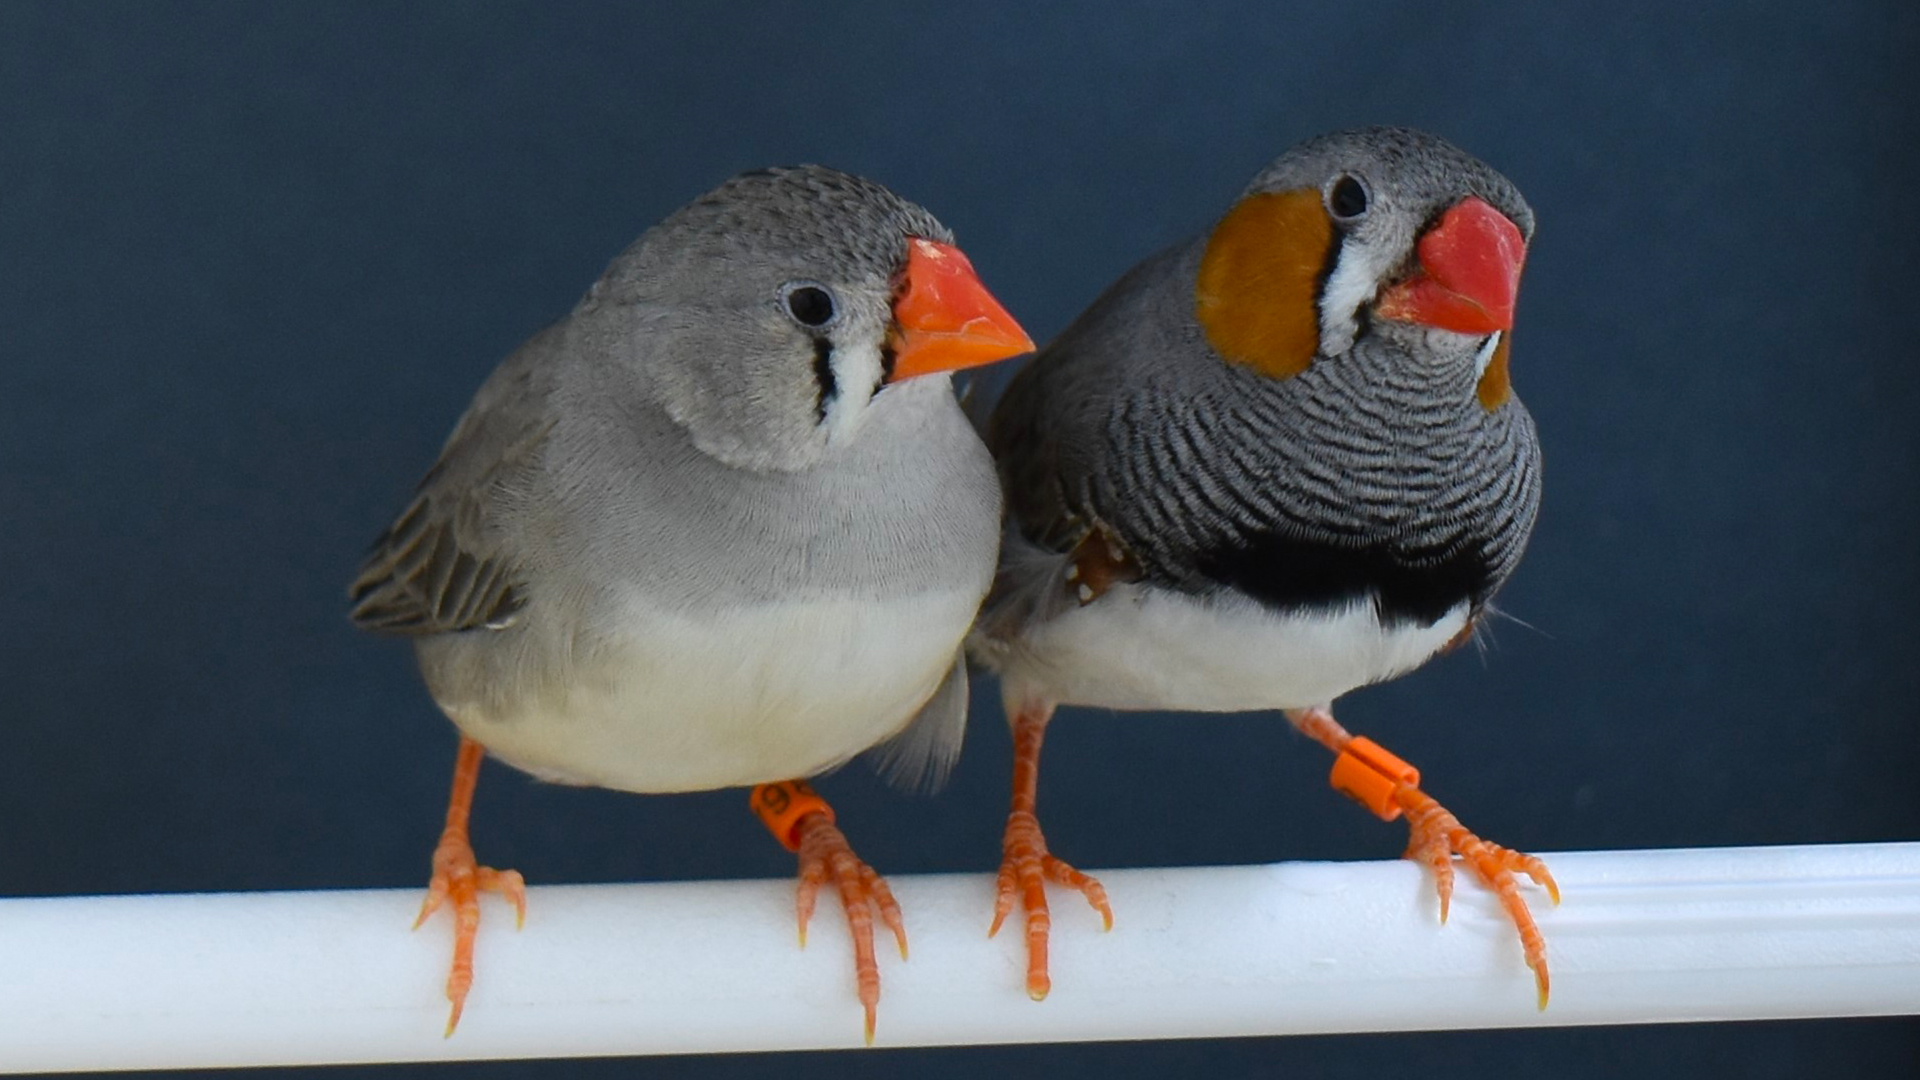 A pair of zebra finches